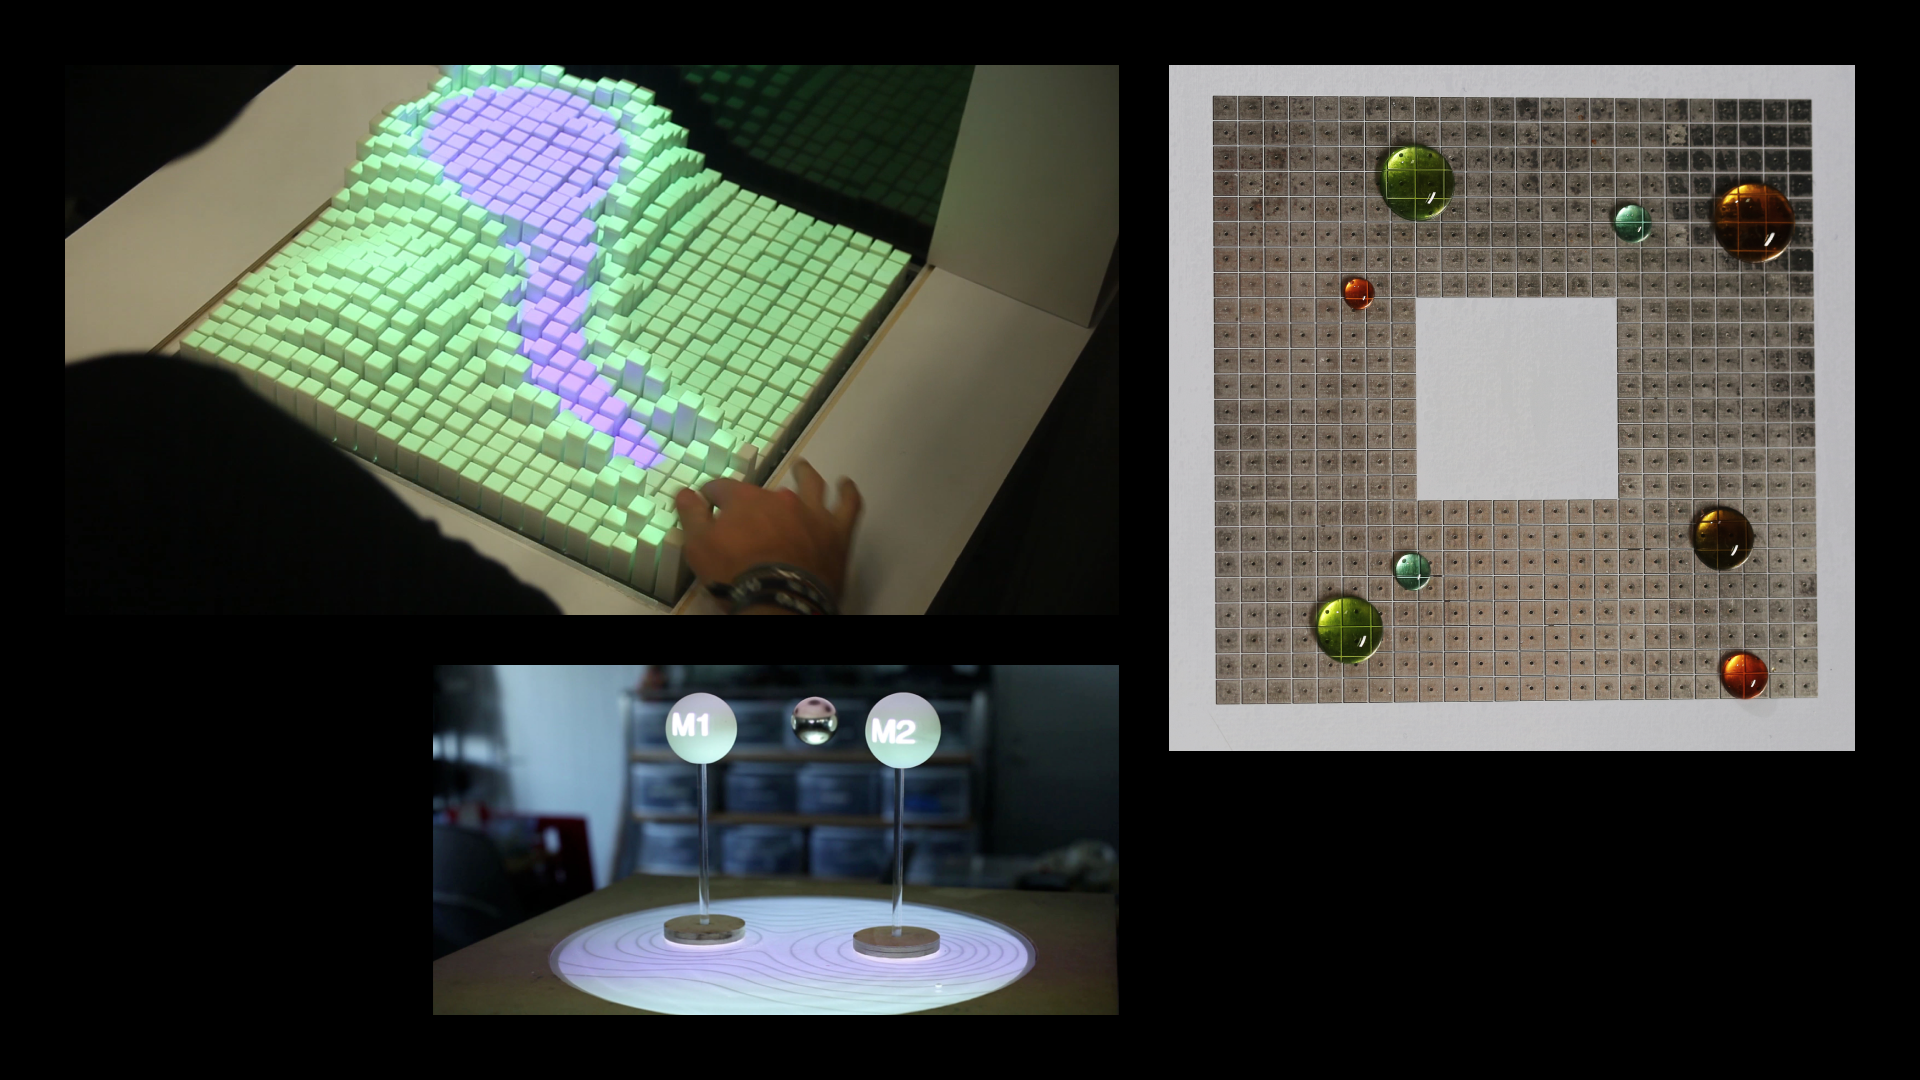 inFORM (2013), zeroN (2011), and Programmable Droplets (2018) by the MIT Media Lab's Tangible Media Group